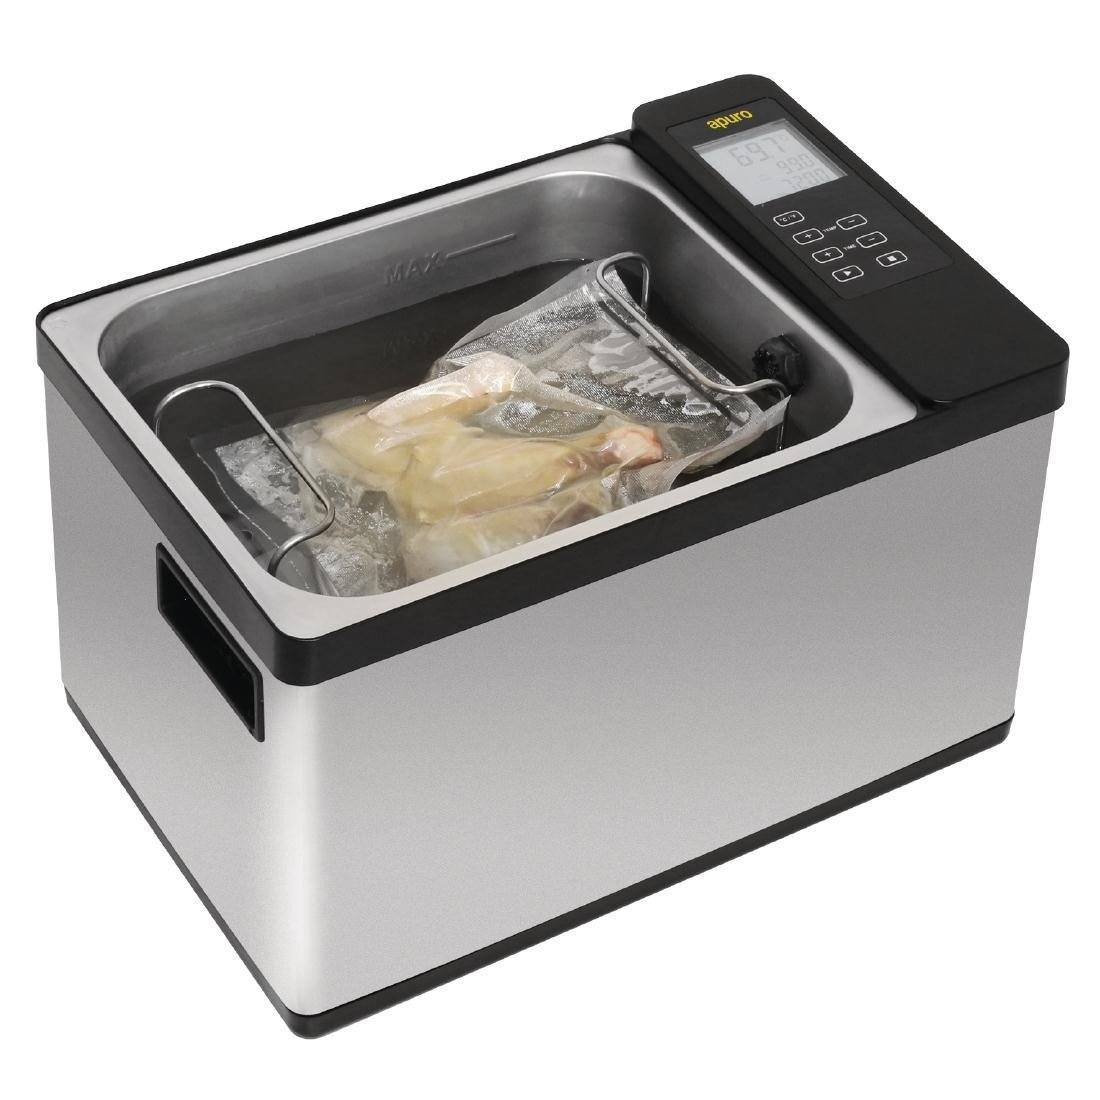 Sous Vide Water Bath Cooker for Home &amp; Commercial by Apuro Sous Vide Machine Apuro 